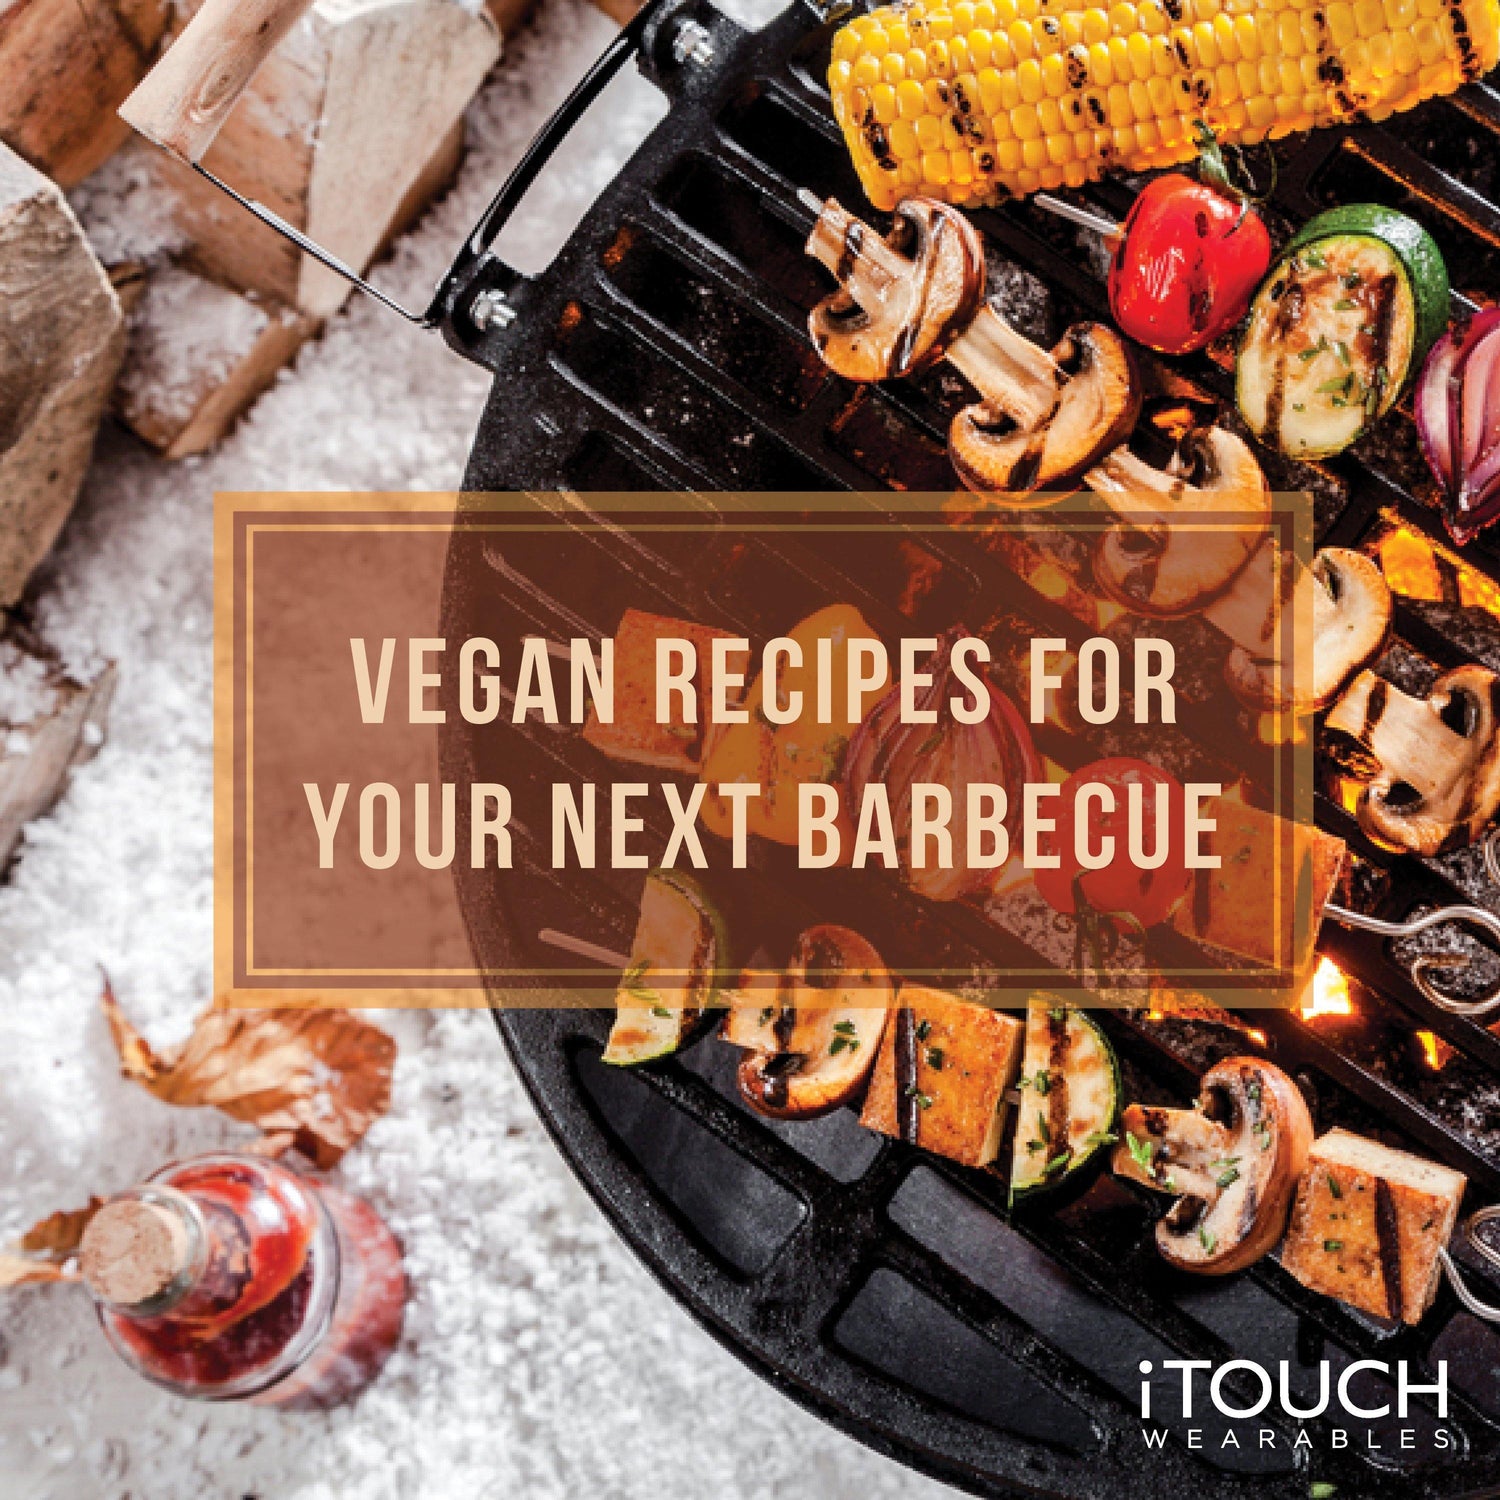 Vegan Recipes For Your Next Barbecue - iTOUCH Wearables